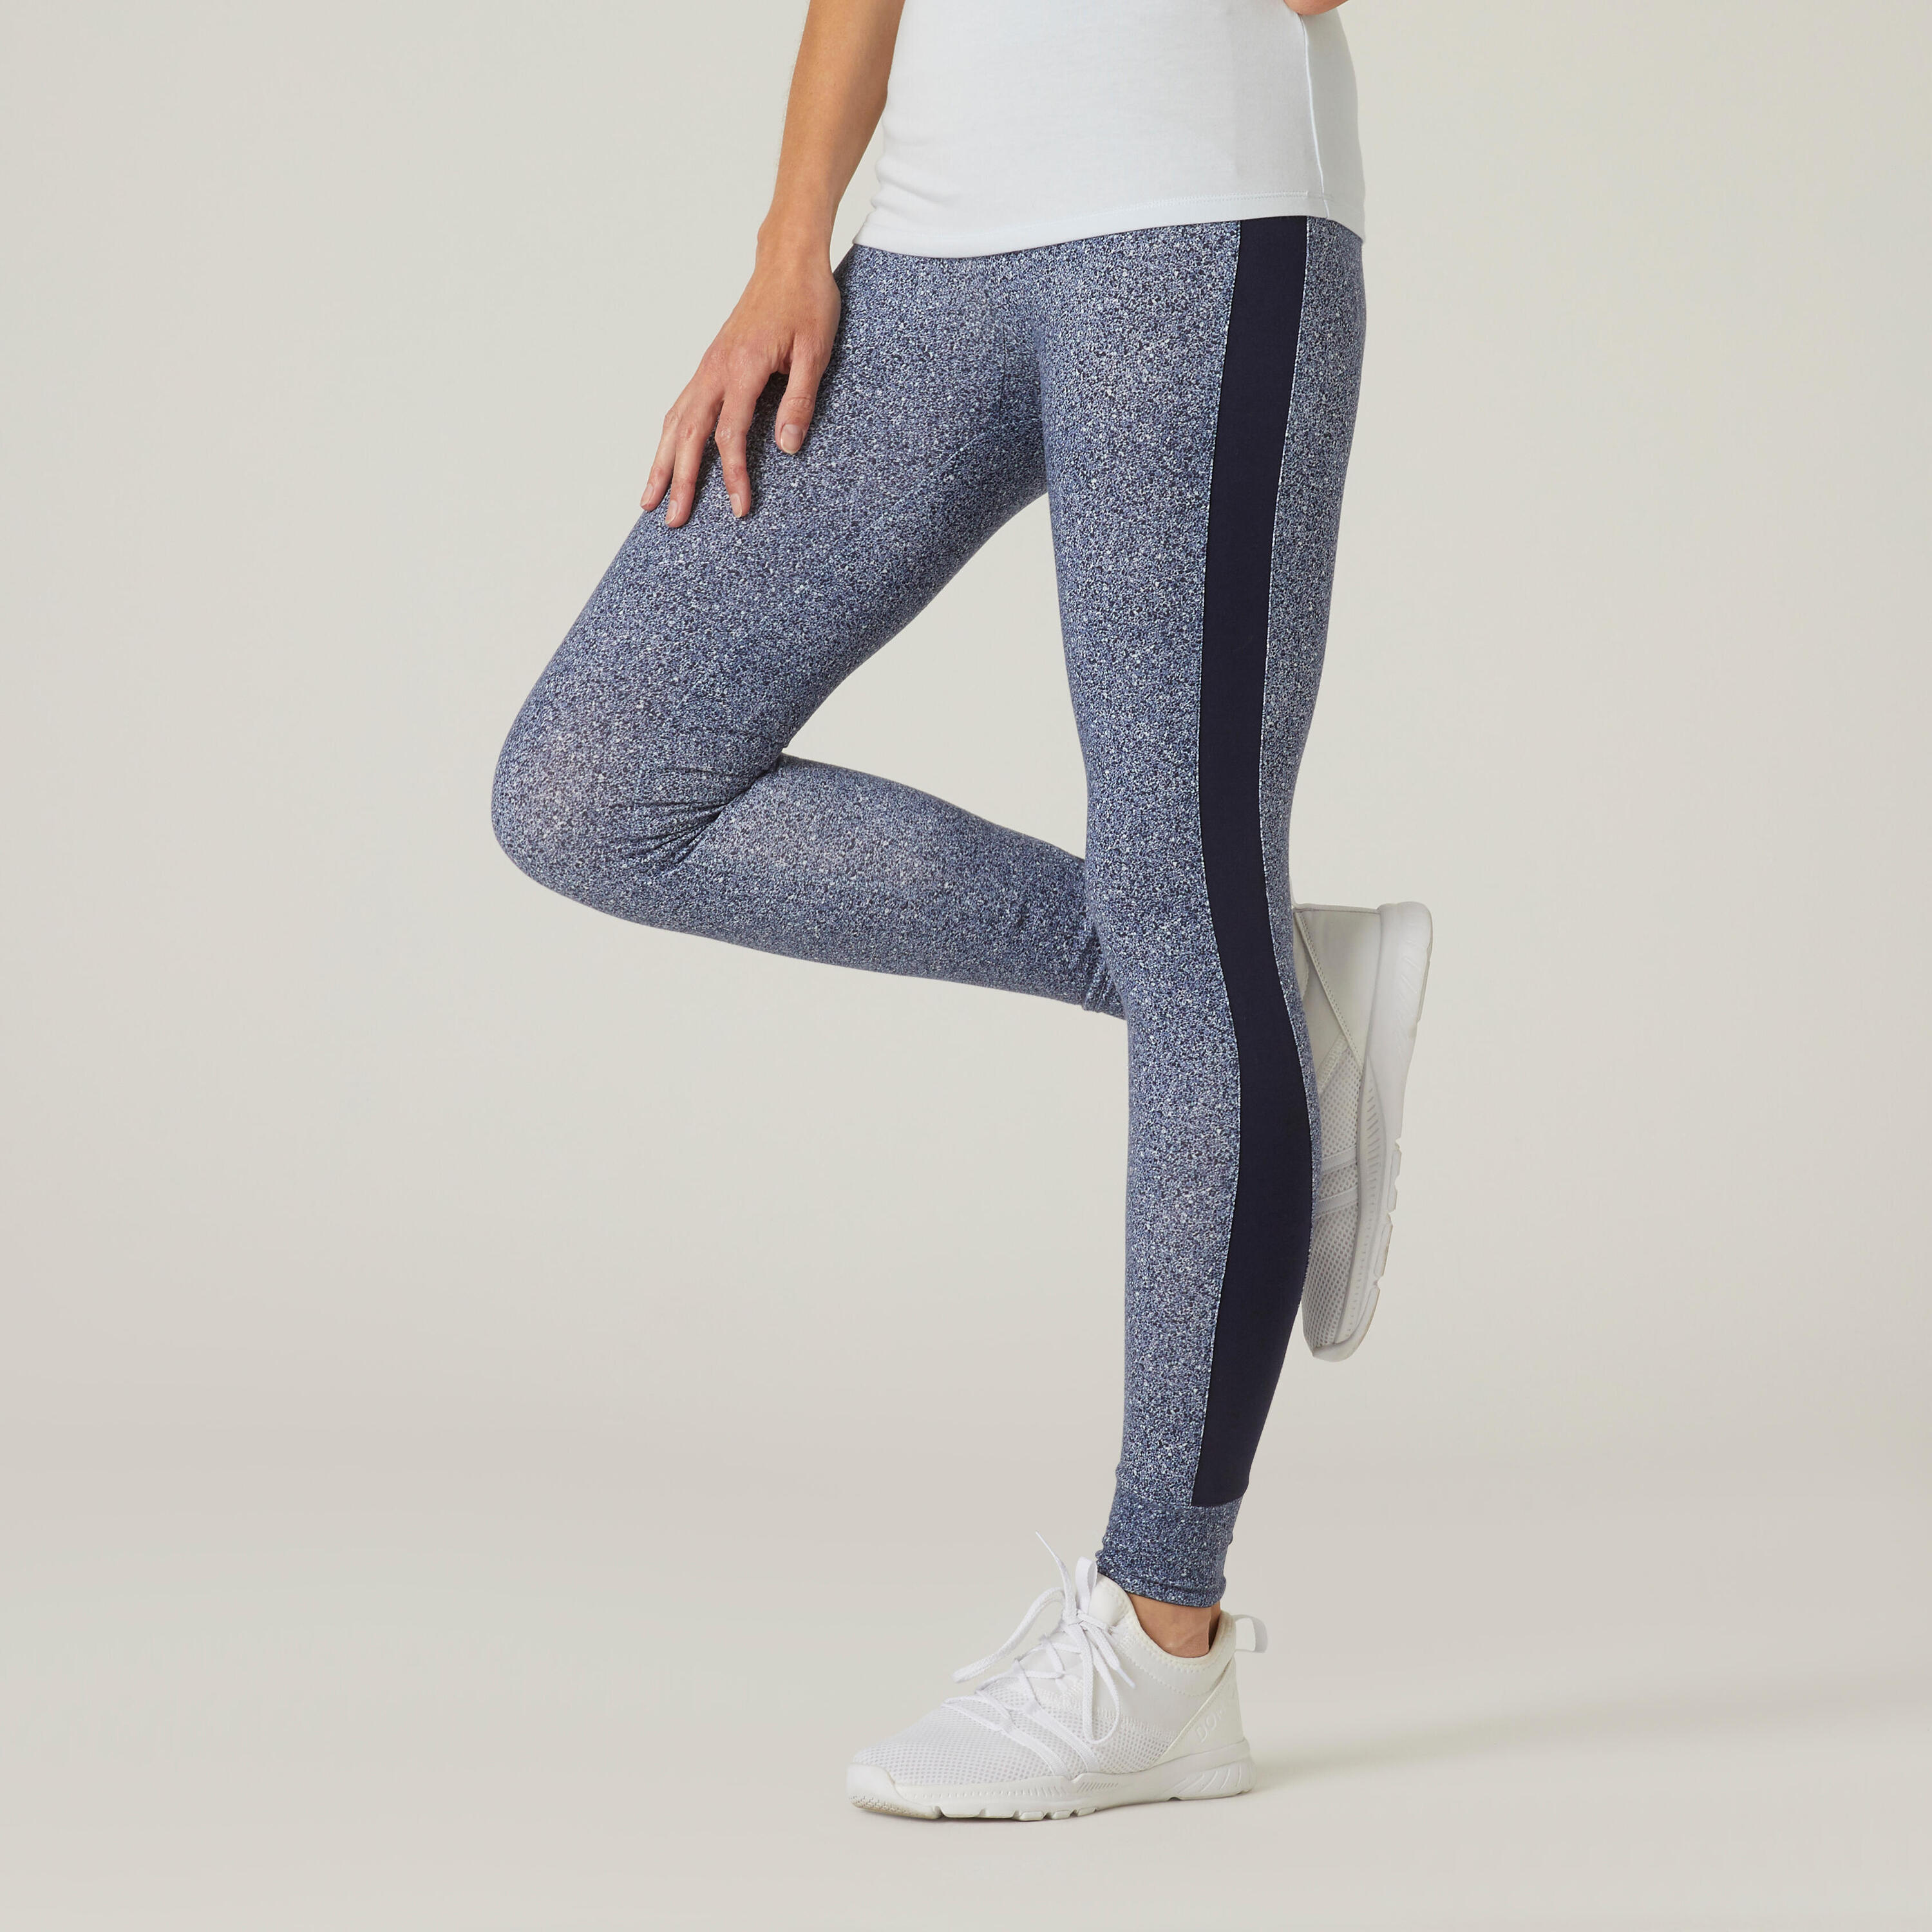 NYAMBA Stretchy High-Waisted Cotton Fitness Leggings - Blue Print